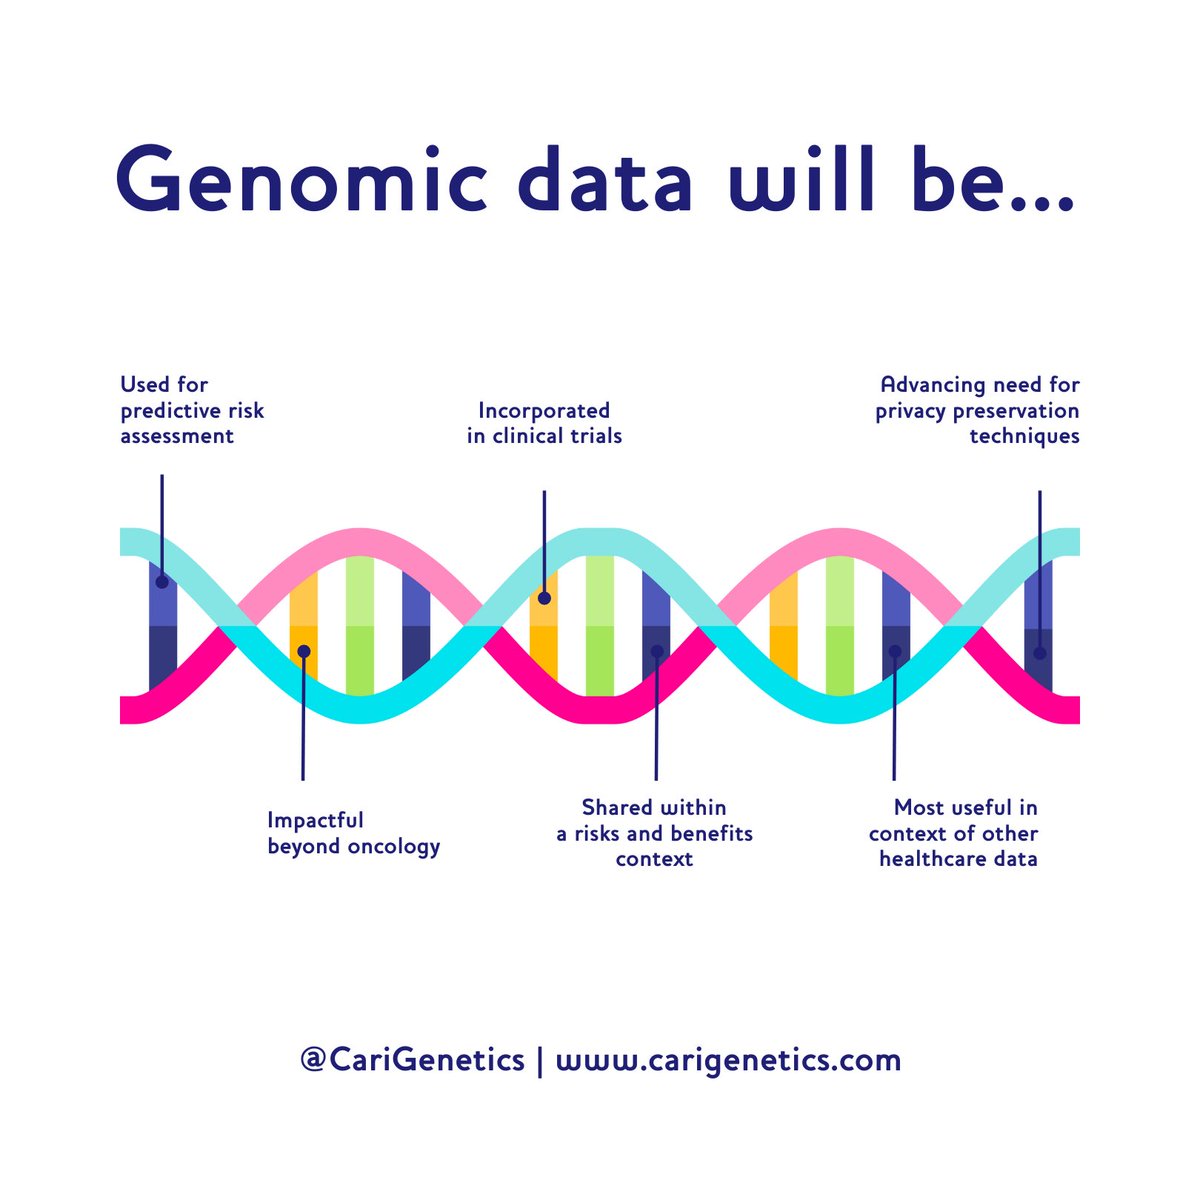 #Didyouknow that genomic data will become a fixture of our future healthcare system? 🧬

At CariGenetics our research studies are impacting and supporting the future of healthcare for everyone! 🫶🏾

#CariGenetics #Genomics
#CaribbeanAncestry #InclusiveHealthcare